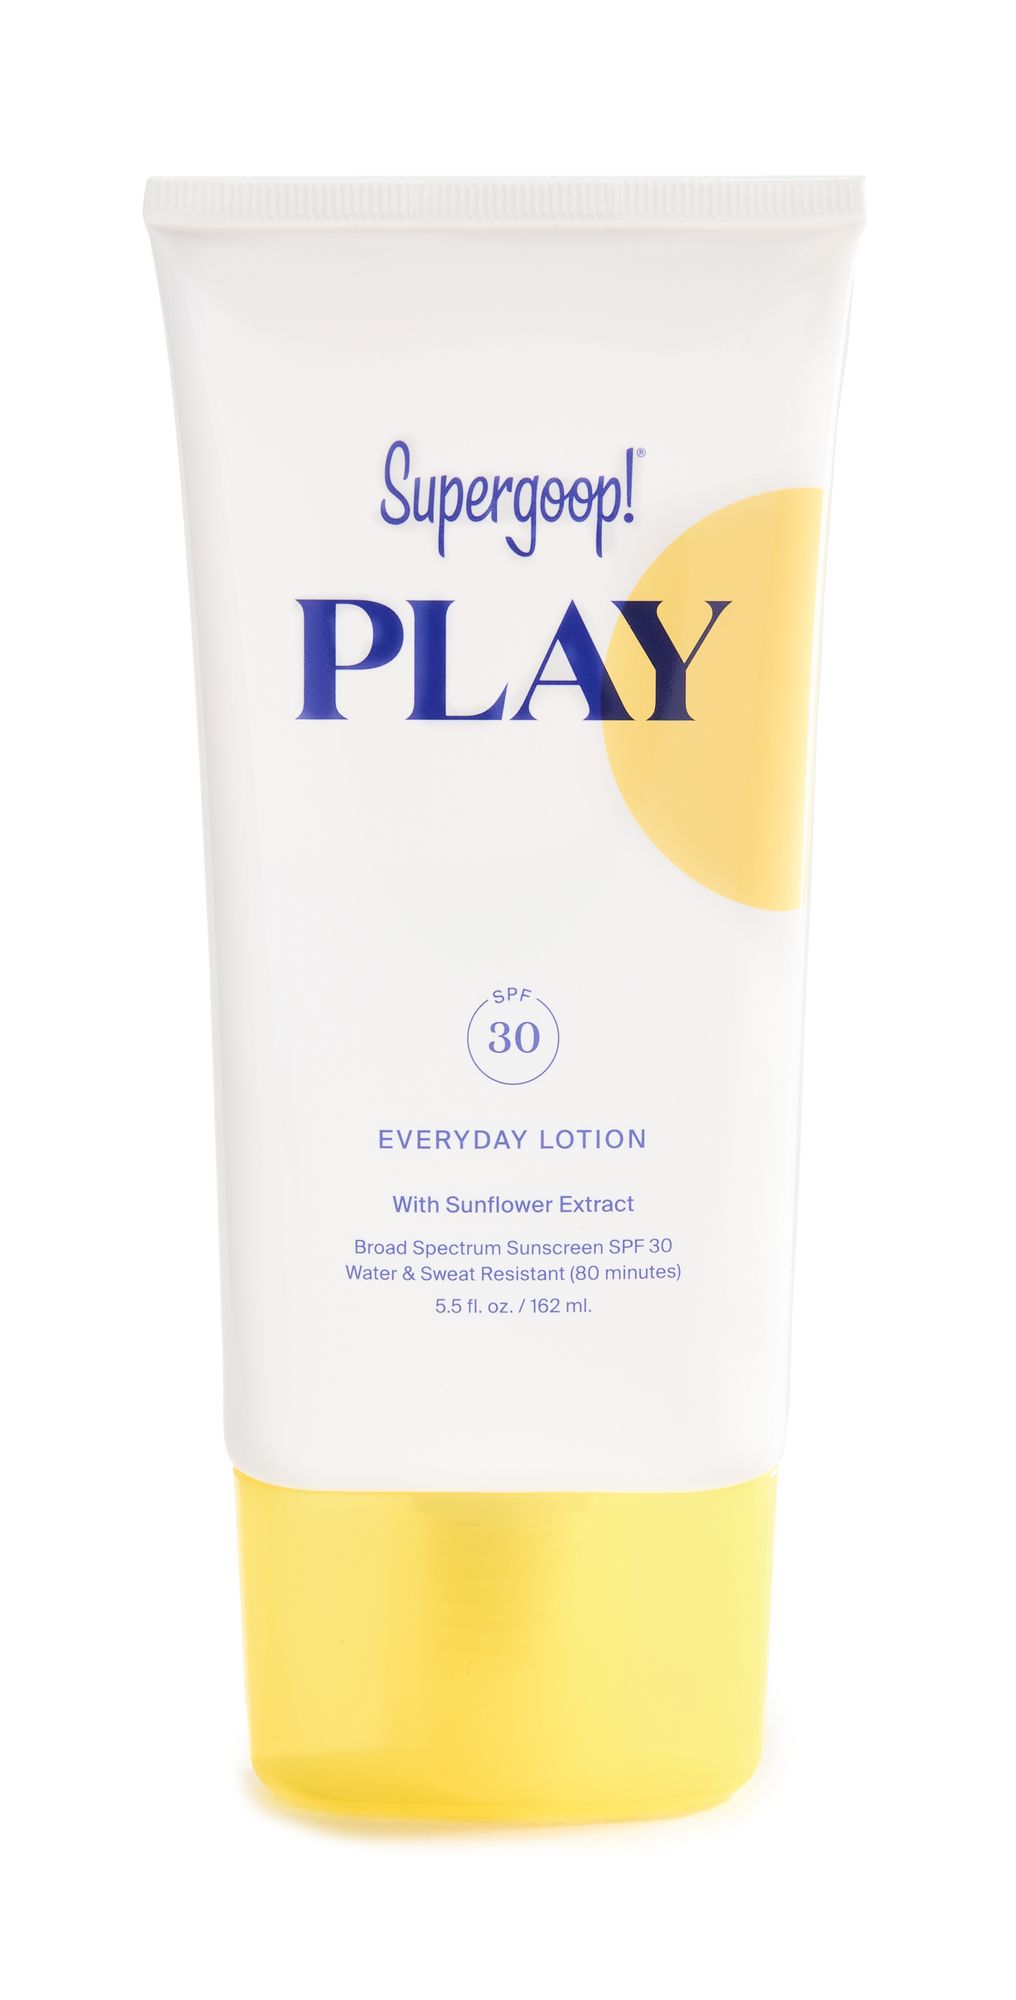 Supergoop! PLAY Everyday Lotion SPF 30 With Sunflower Extract | Shopbop